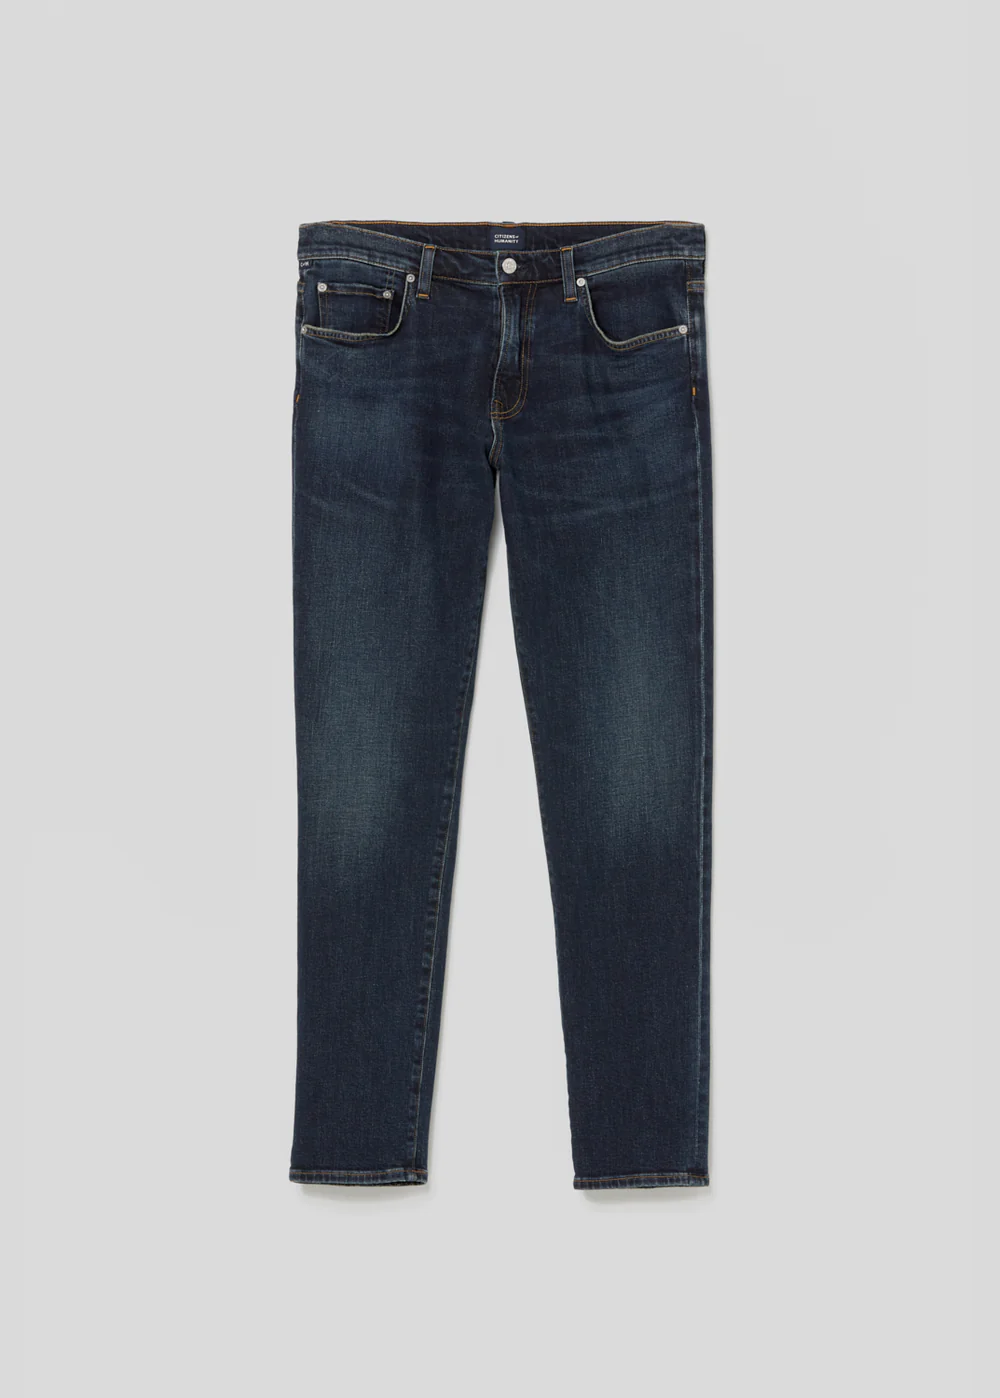 Front view of the London from Citizens of Humanity in deep clean saturated indigo.Sslim fit jean that fits fuller in the thighs and tapers to the ankle.